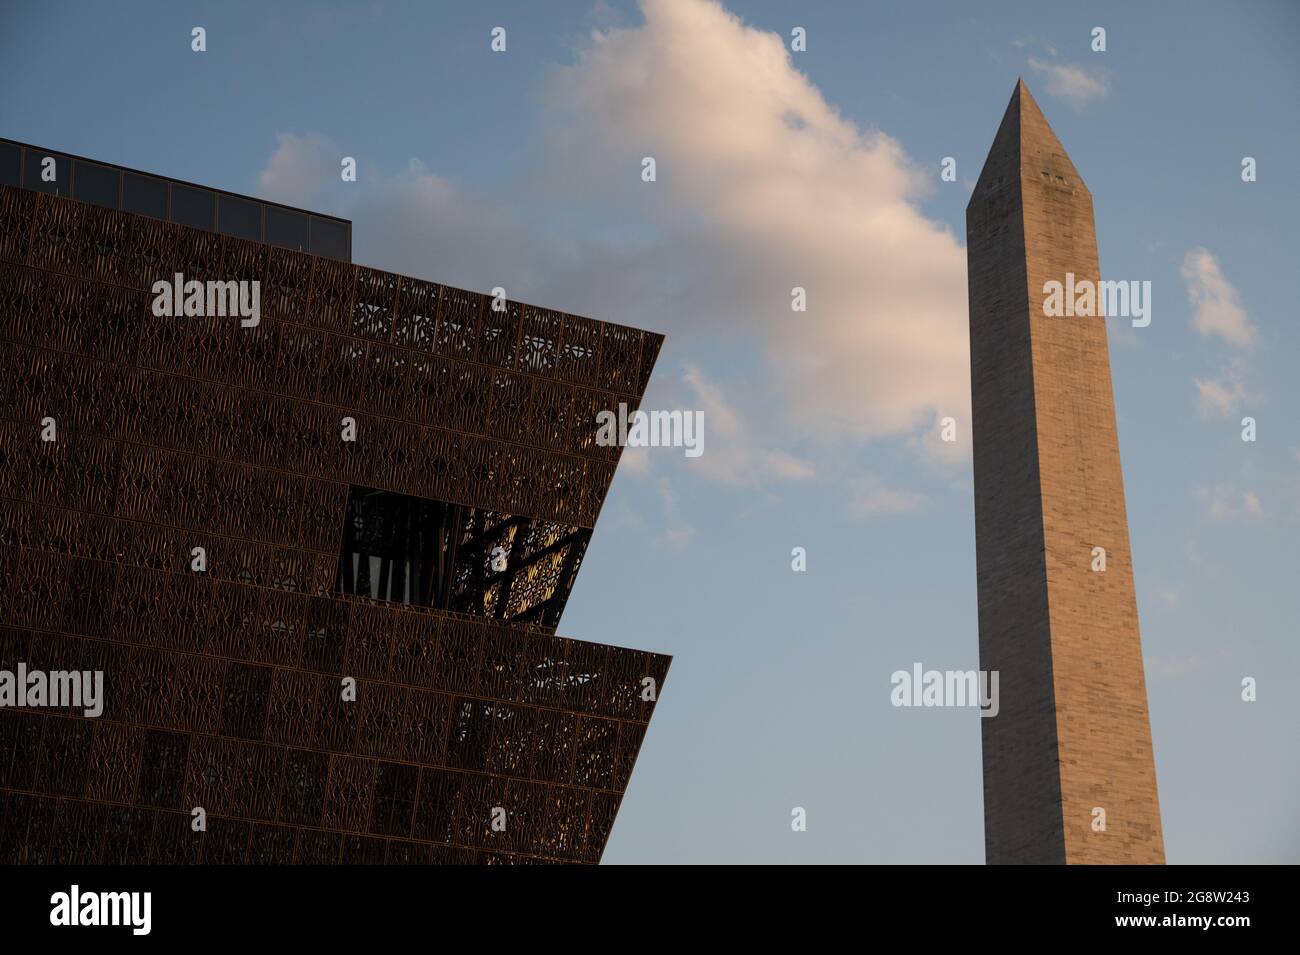 Washington, USA. 23rd July, 2021. A general view of the Smithsonian National Museum of African American History and Culture and the Washington Monument, in Washington, DC, on Thursday, July 22, 2021, amid the coronavirus pandemic. As the Delta variant of COVID-19 spreads rapidly in the America and around the world, this week in Washington negotiations over infrastructure legislation have continued in Congress. (Graeme Sloan/Sipa USA) Credit: Sipa USA/Alamy Live News Stock Photo